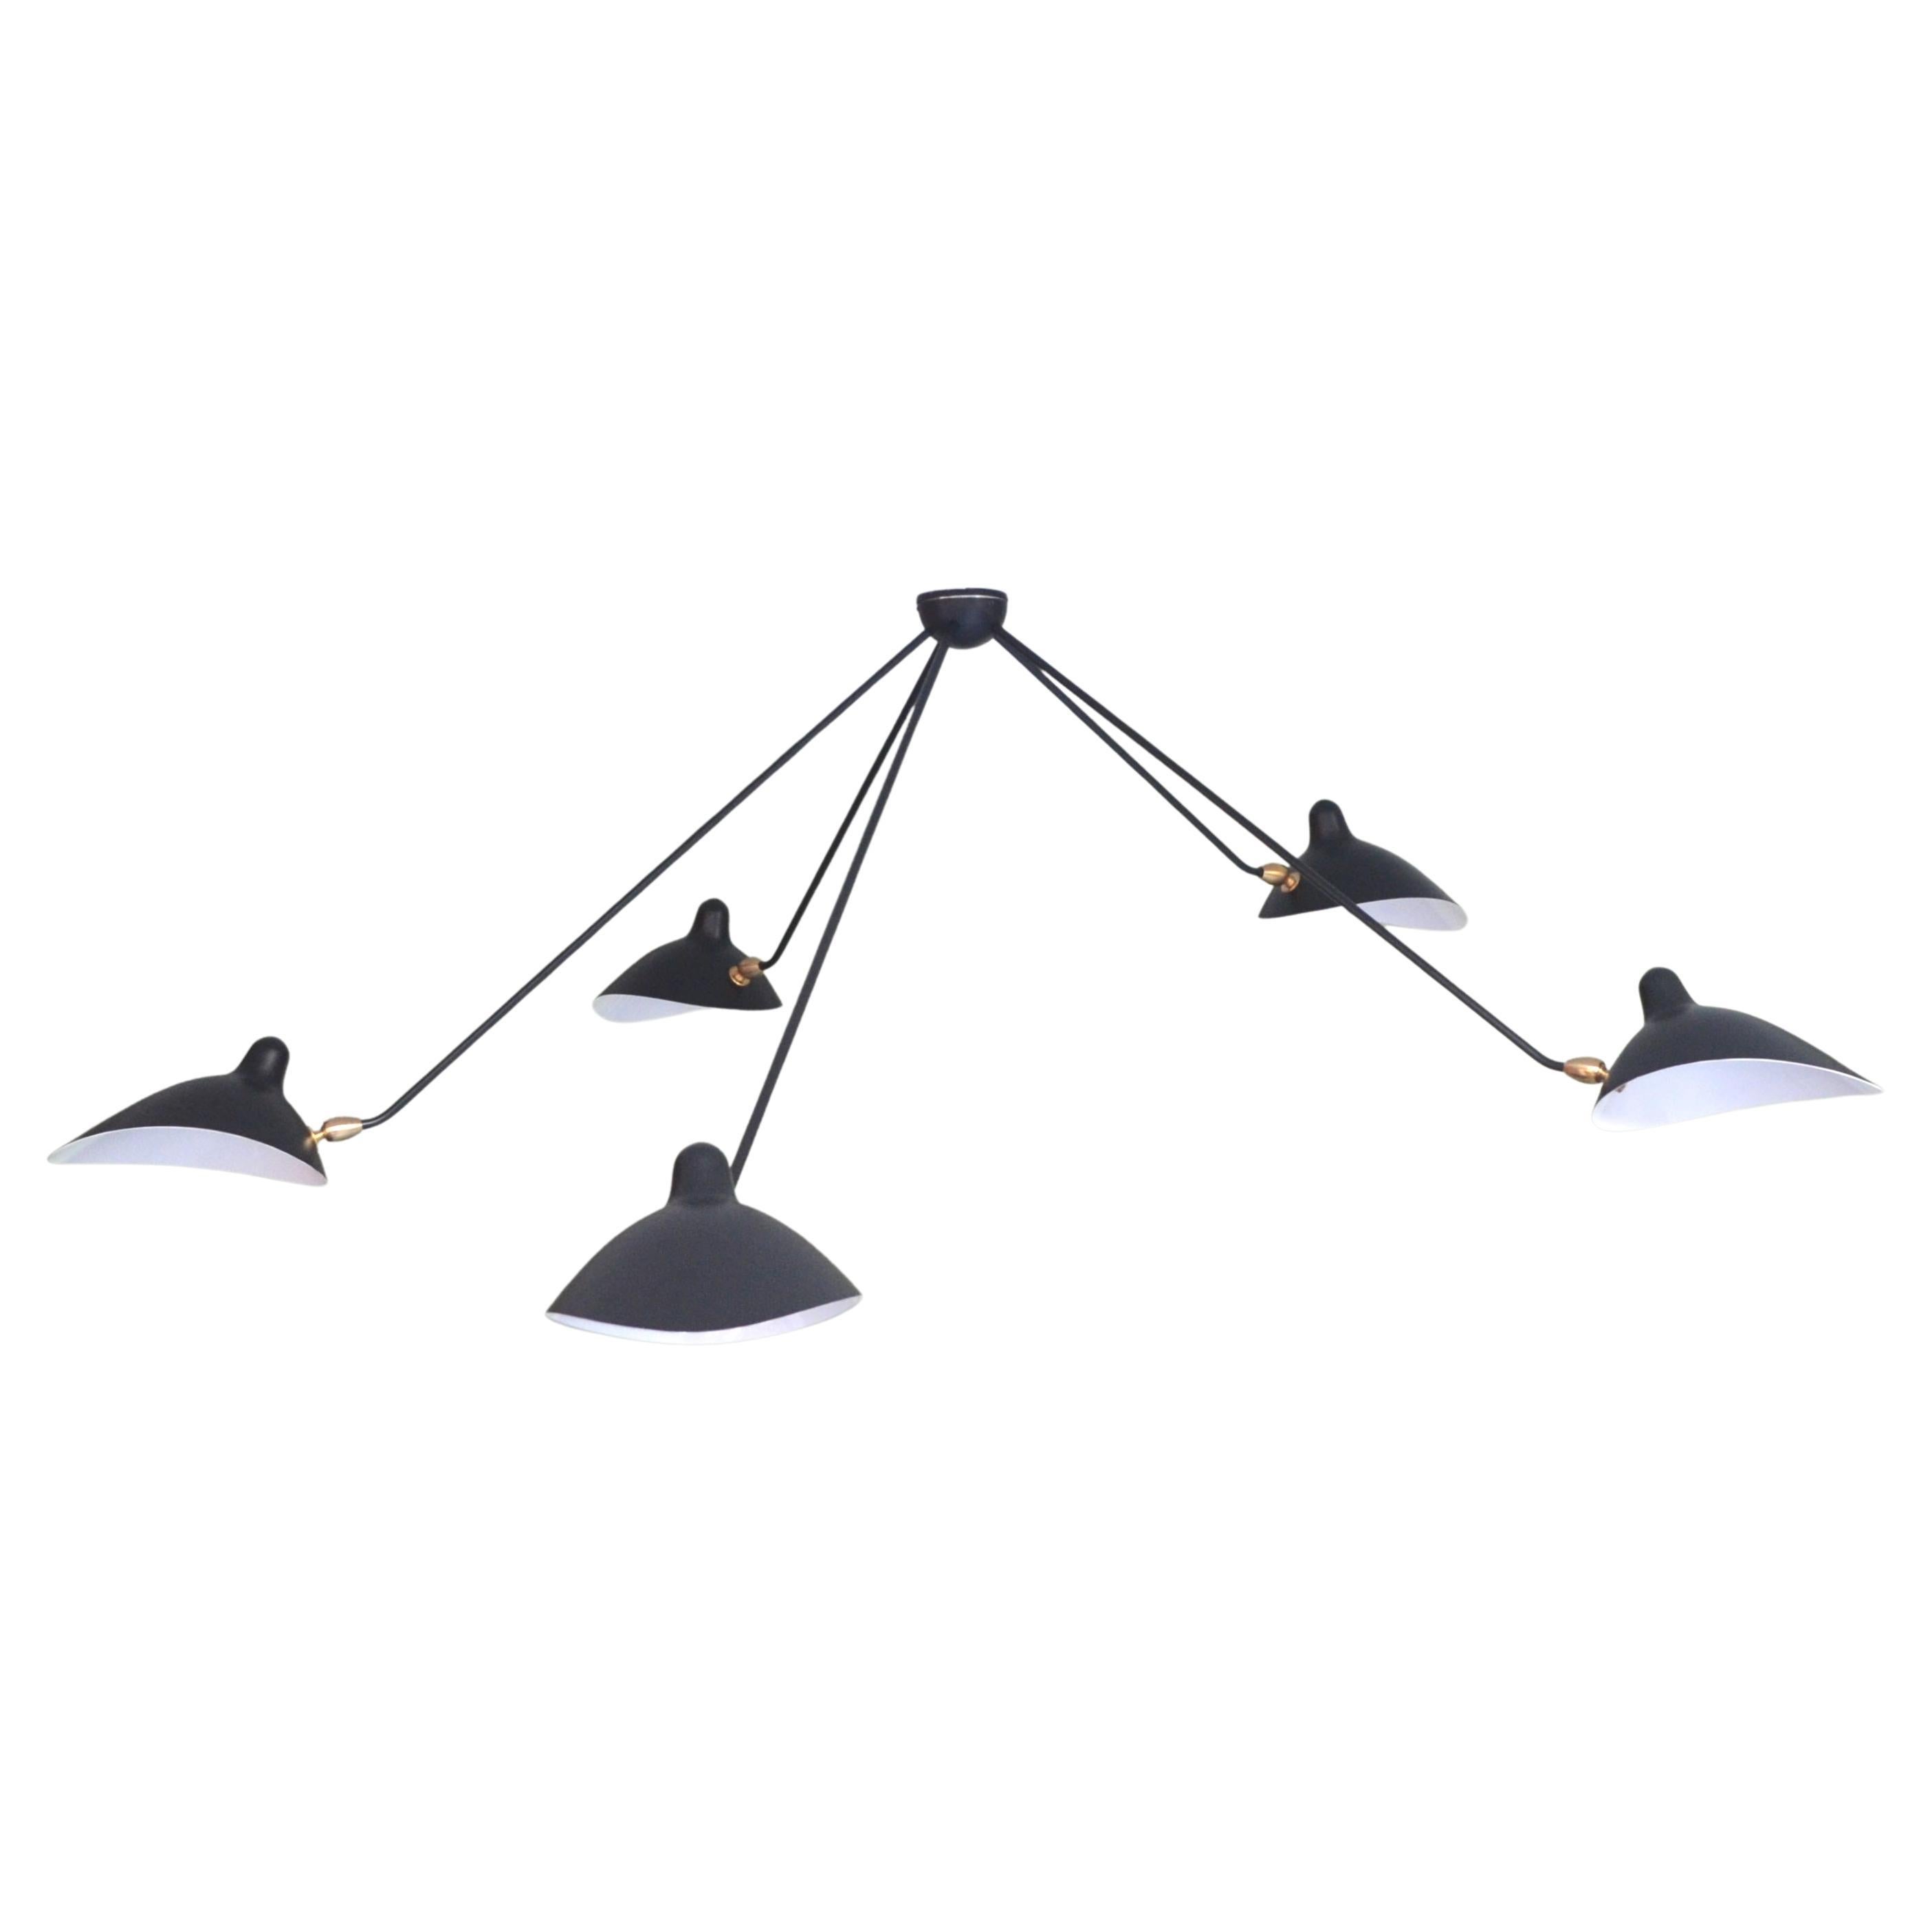 Serge Mouille - Black or White Spider Ceiling Lamp with 5 Arms 